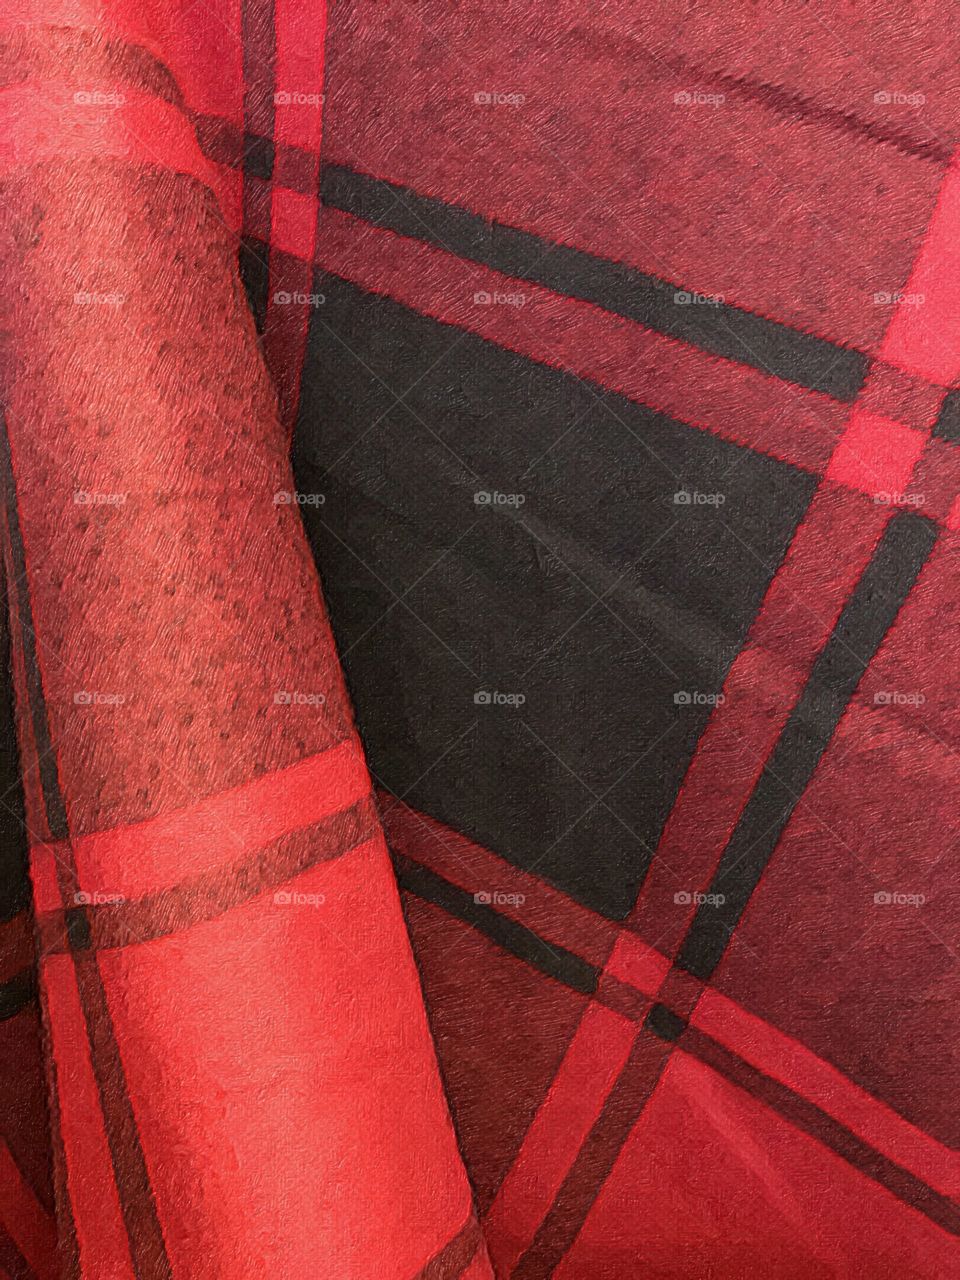 Plaid coat. Enhanced with iPhone app brushstroke to make it look like a painting. 